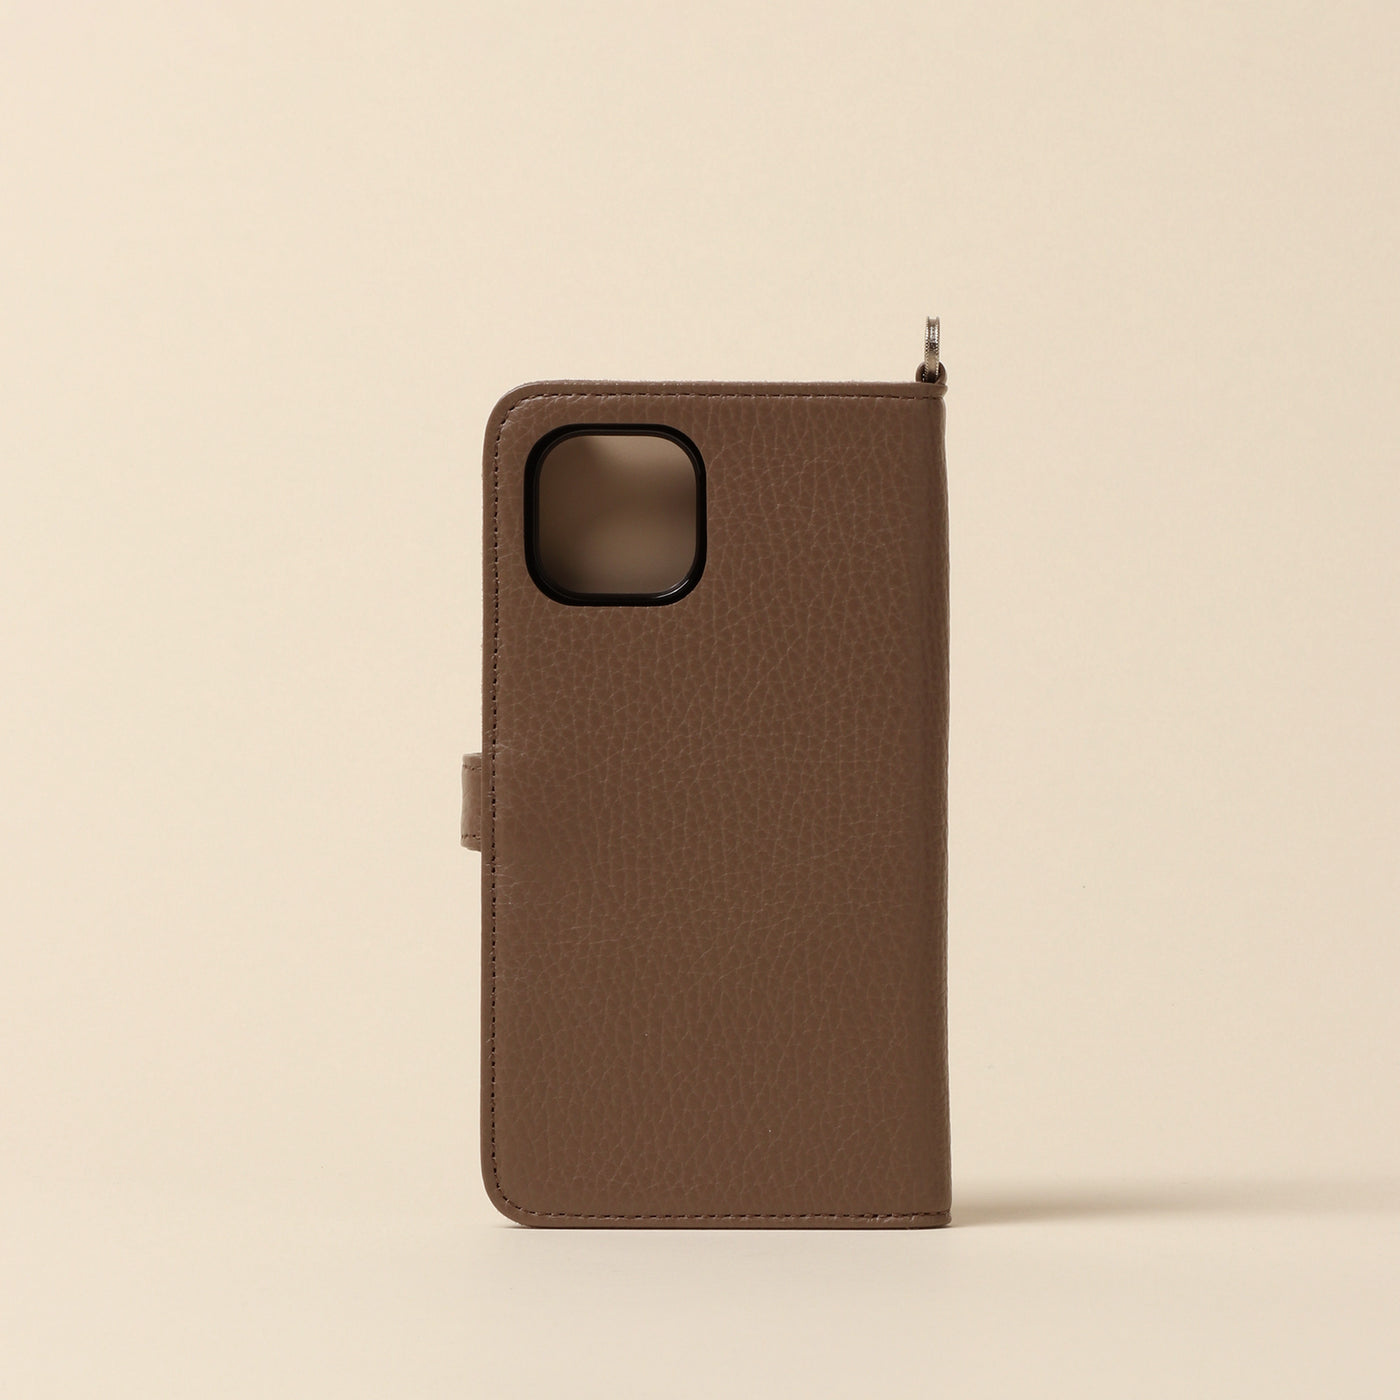 ＜CALDO tokyo japan＞ CROSSOVER iPhone case (iPhone13) / Taupe Beige